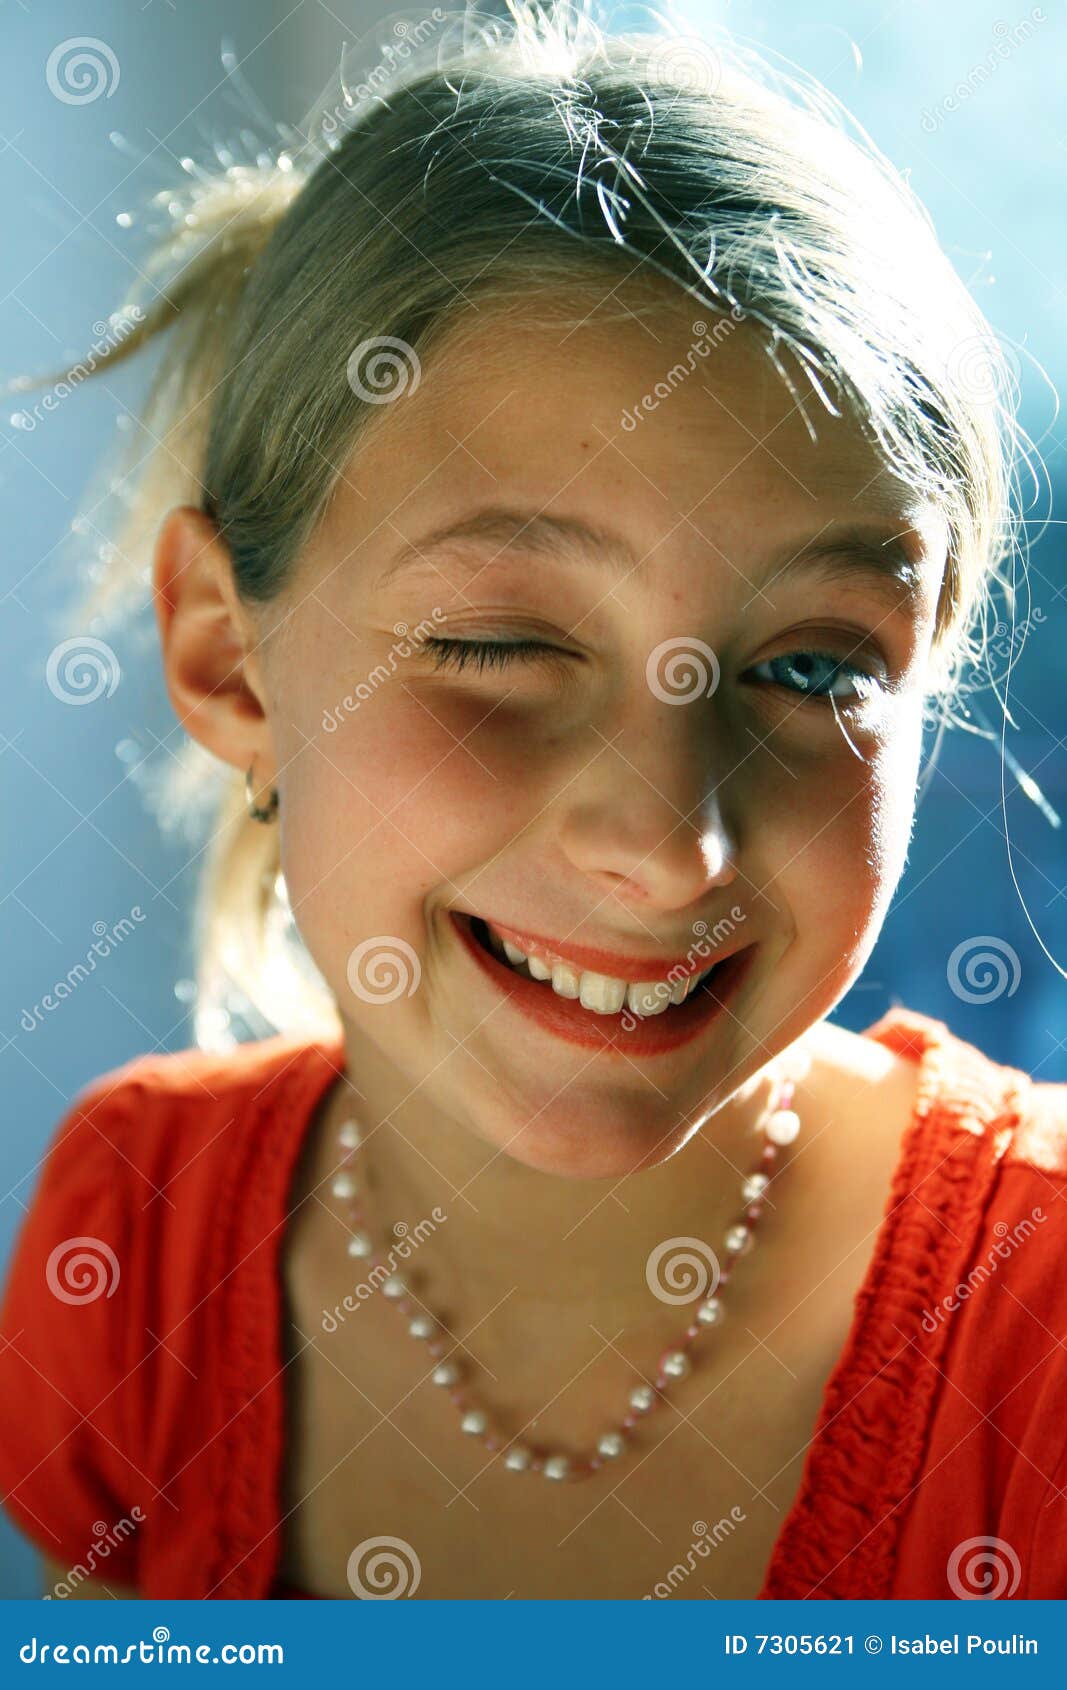 Young Girl Winking Stock Image - Image: 7305621